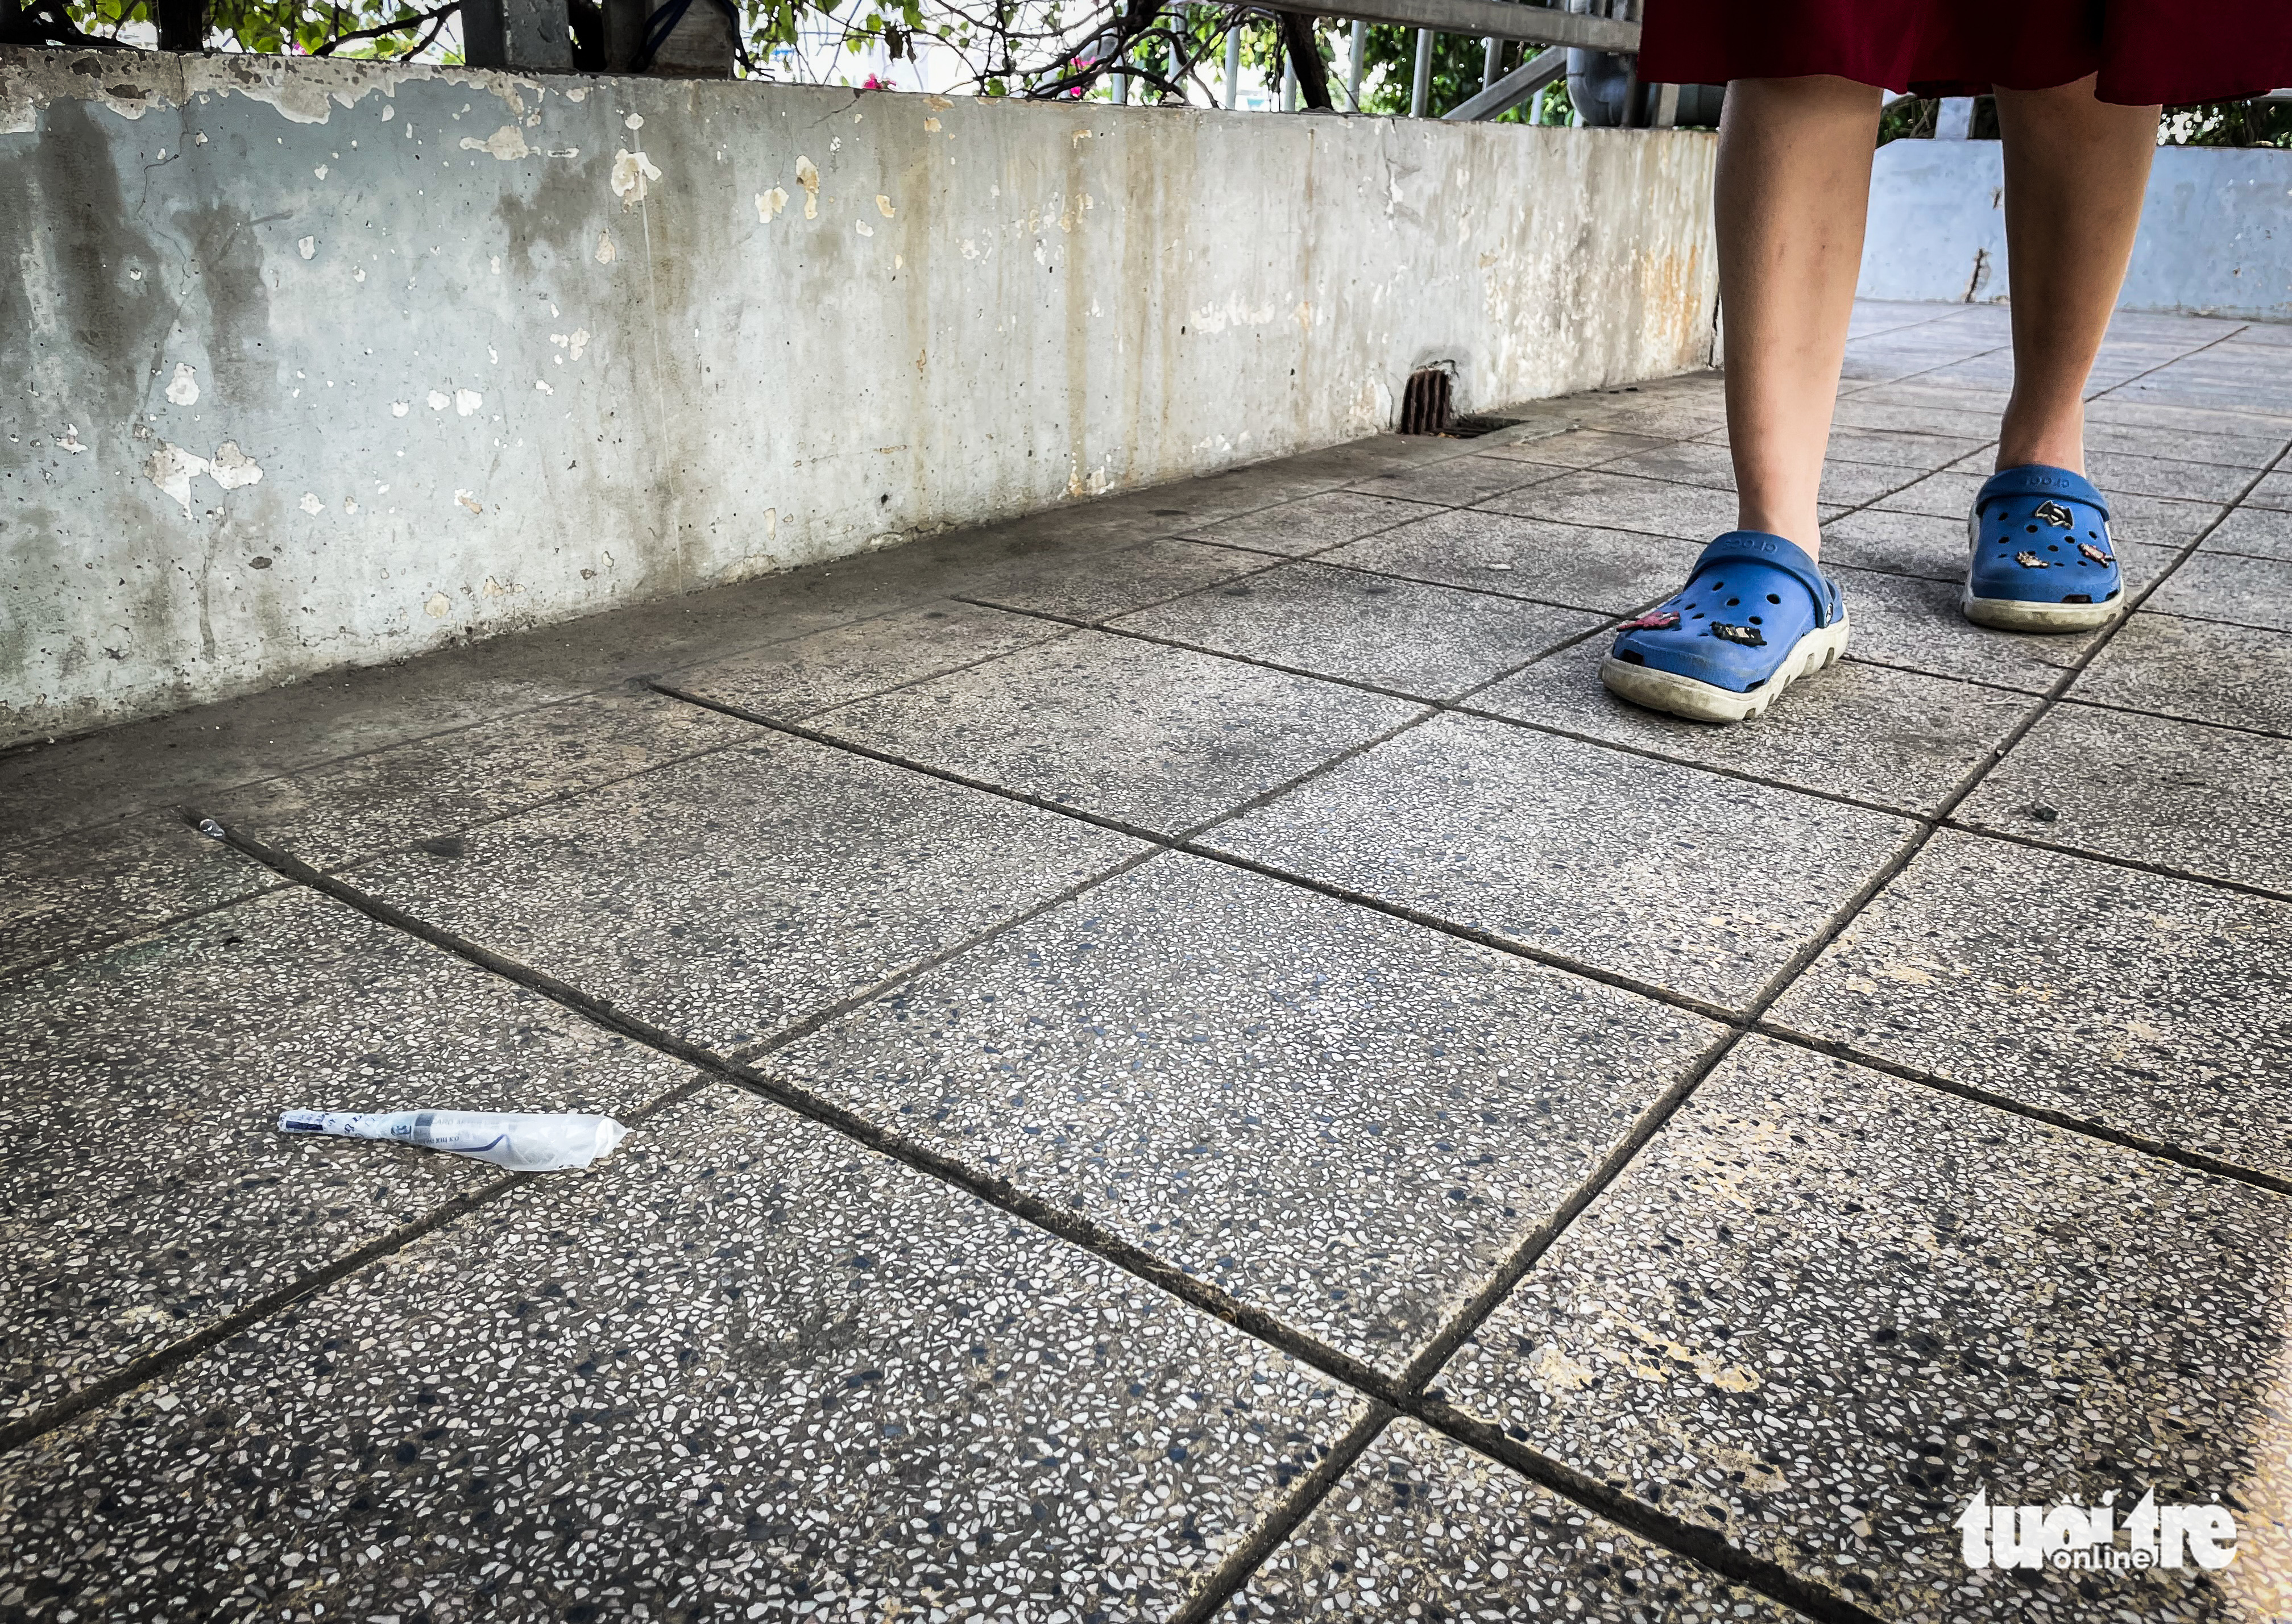 A used syringes is pictured on a footbridge in Ho Chi Minh City, August 19, 2022. Photo: Chau Tuan / Tuoi Tre